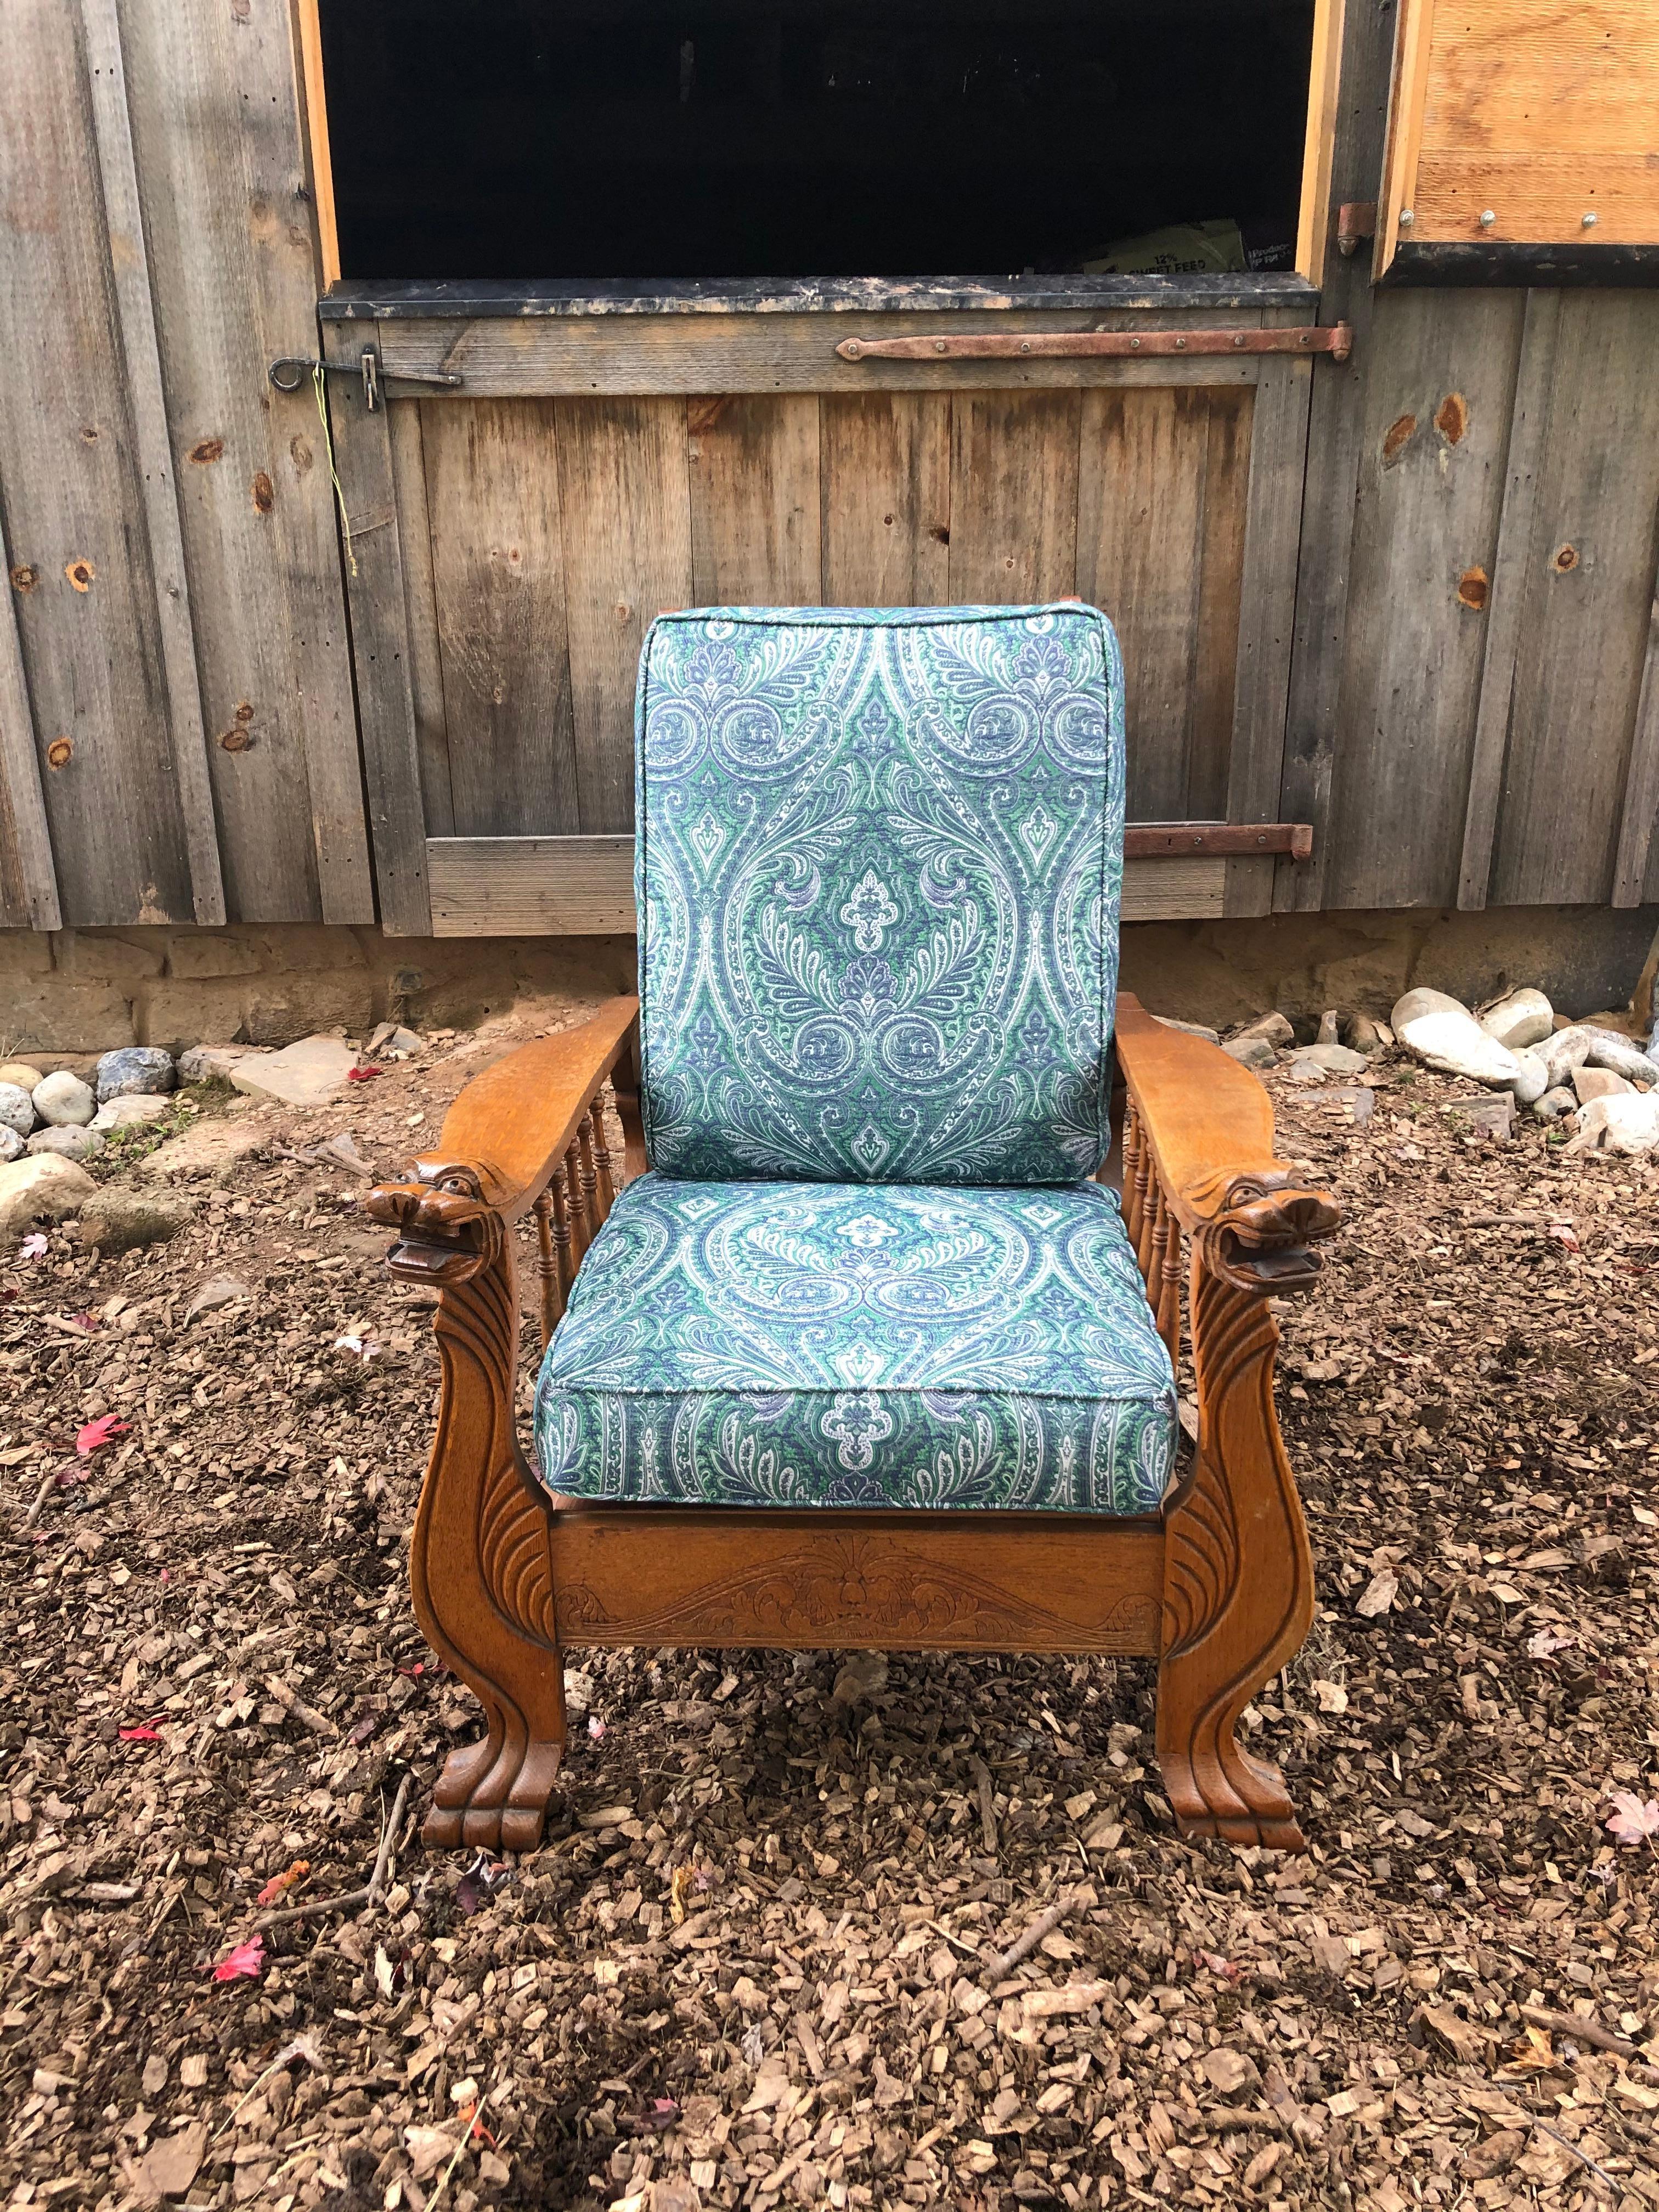 An authentic S.A.Cook carved oak reclining Morris chair having fantastic growling carved griffin hand rests. Custom cushions are covered in a blue and white paisley.
Measures: Arm height 26.5
Seat depth 20
Arm to arm 29.5 W
Leg to leg 30.5 W.